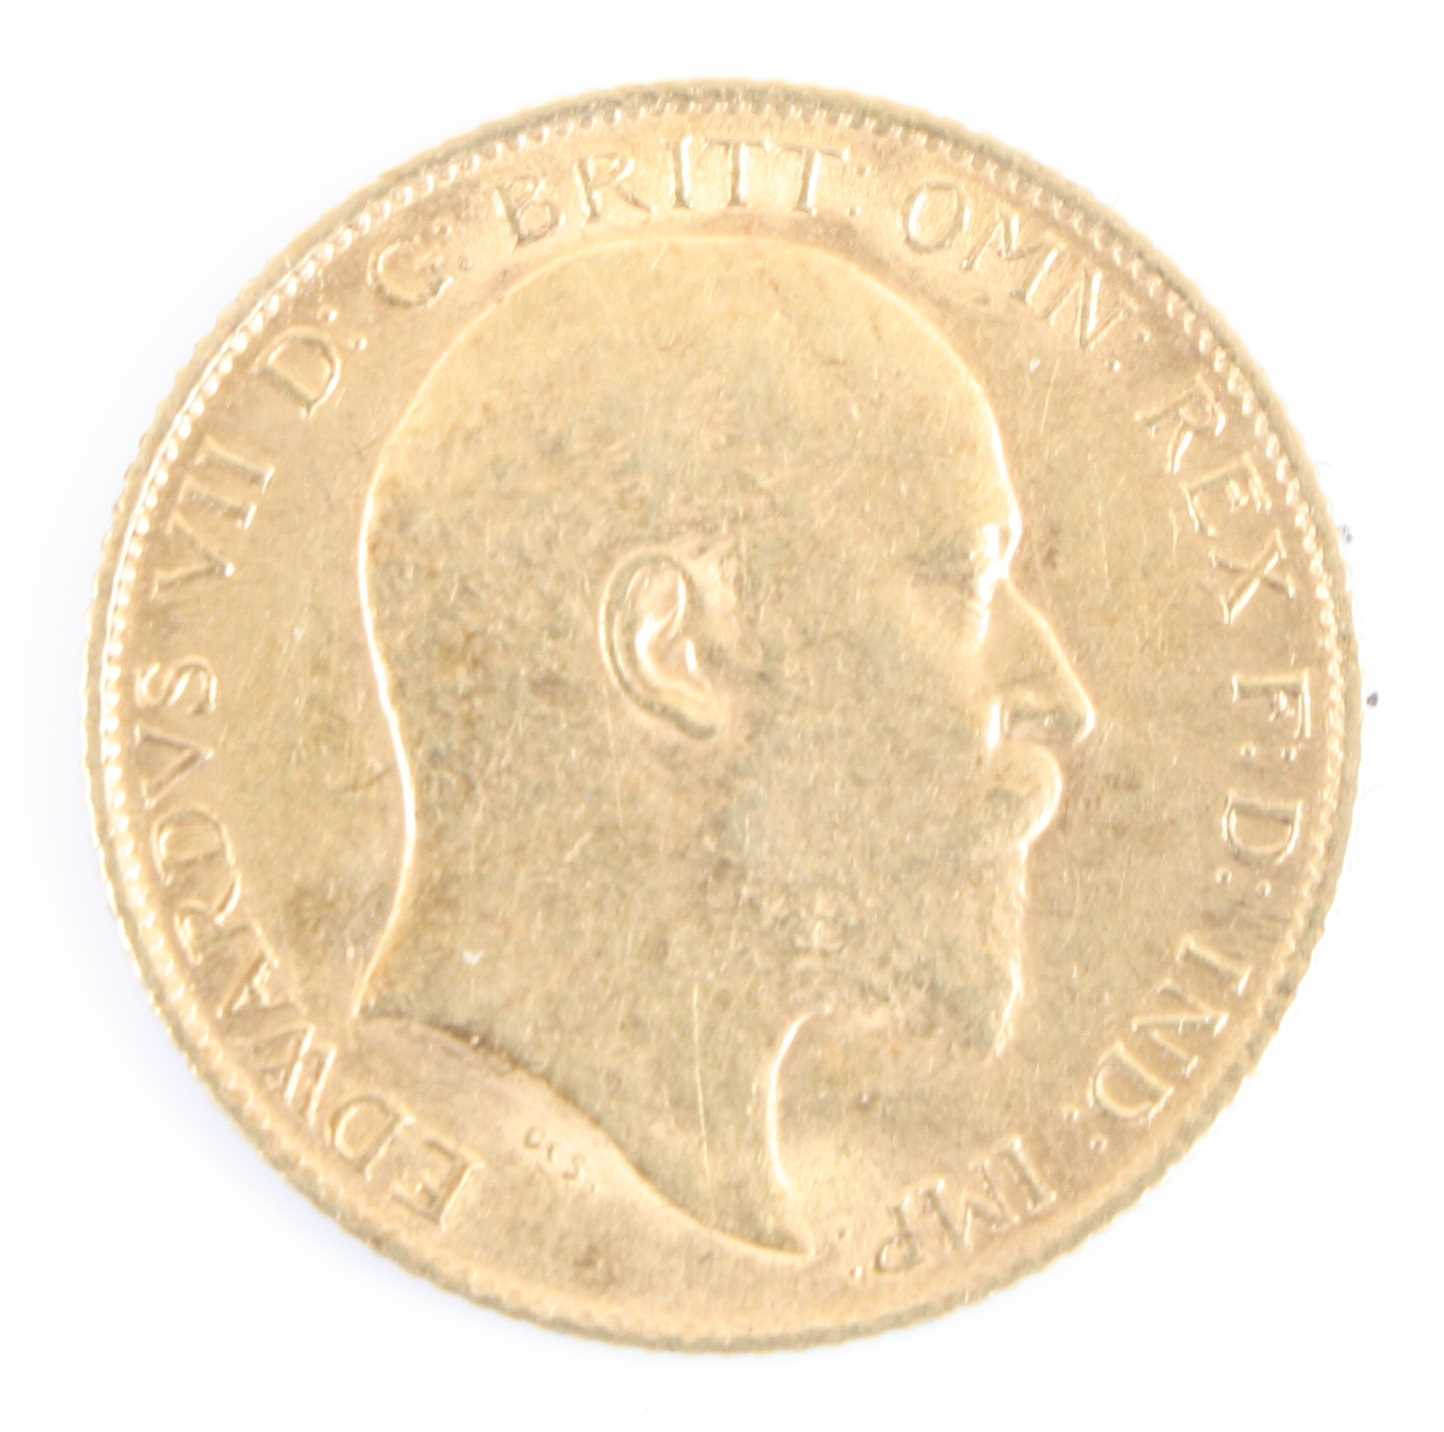 Great Britain, 1906 gold half sovereign, Edward VII, rev: St George and Dragon above date. (1)